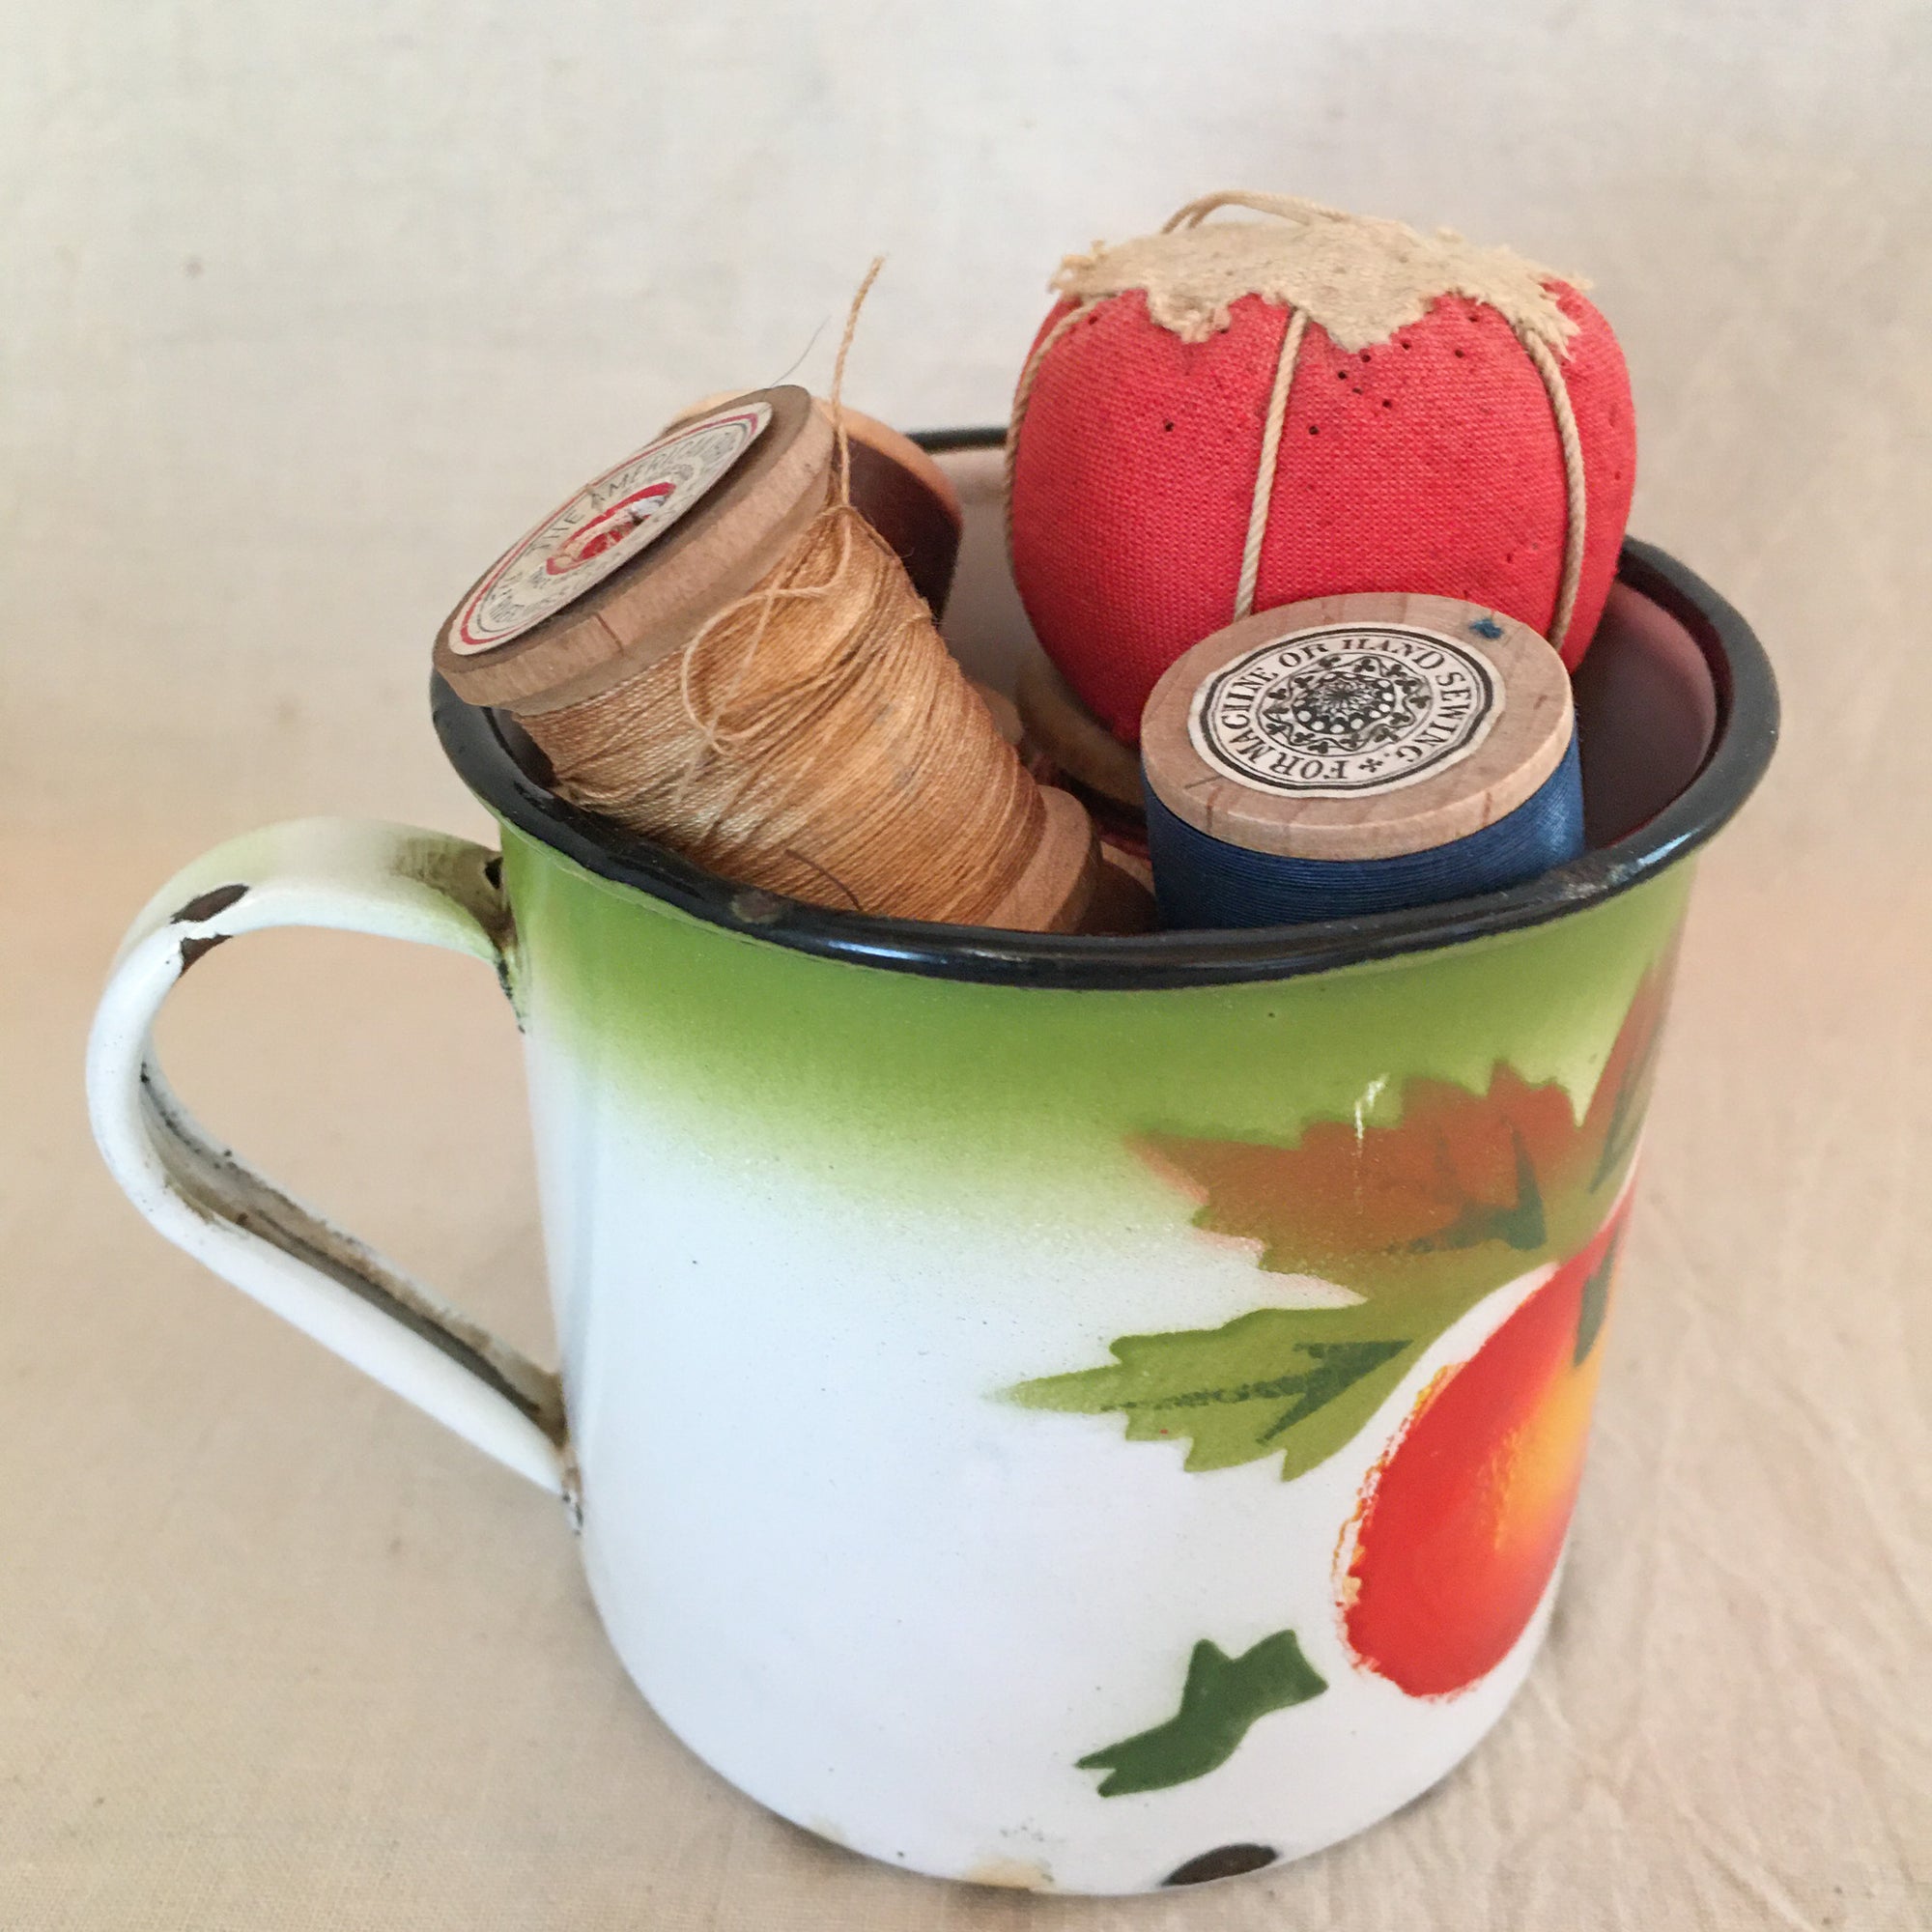 Vintage Toffee Tin with Buttons, Vintage Enamel Ware Cup with Wooden Spools and Small Tomato